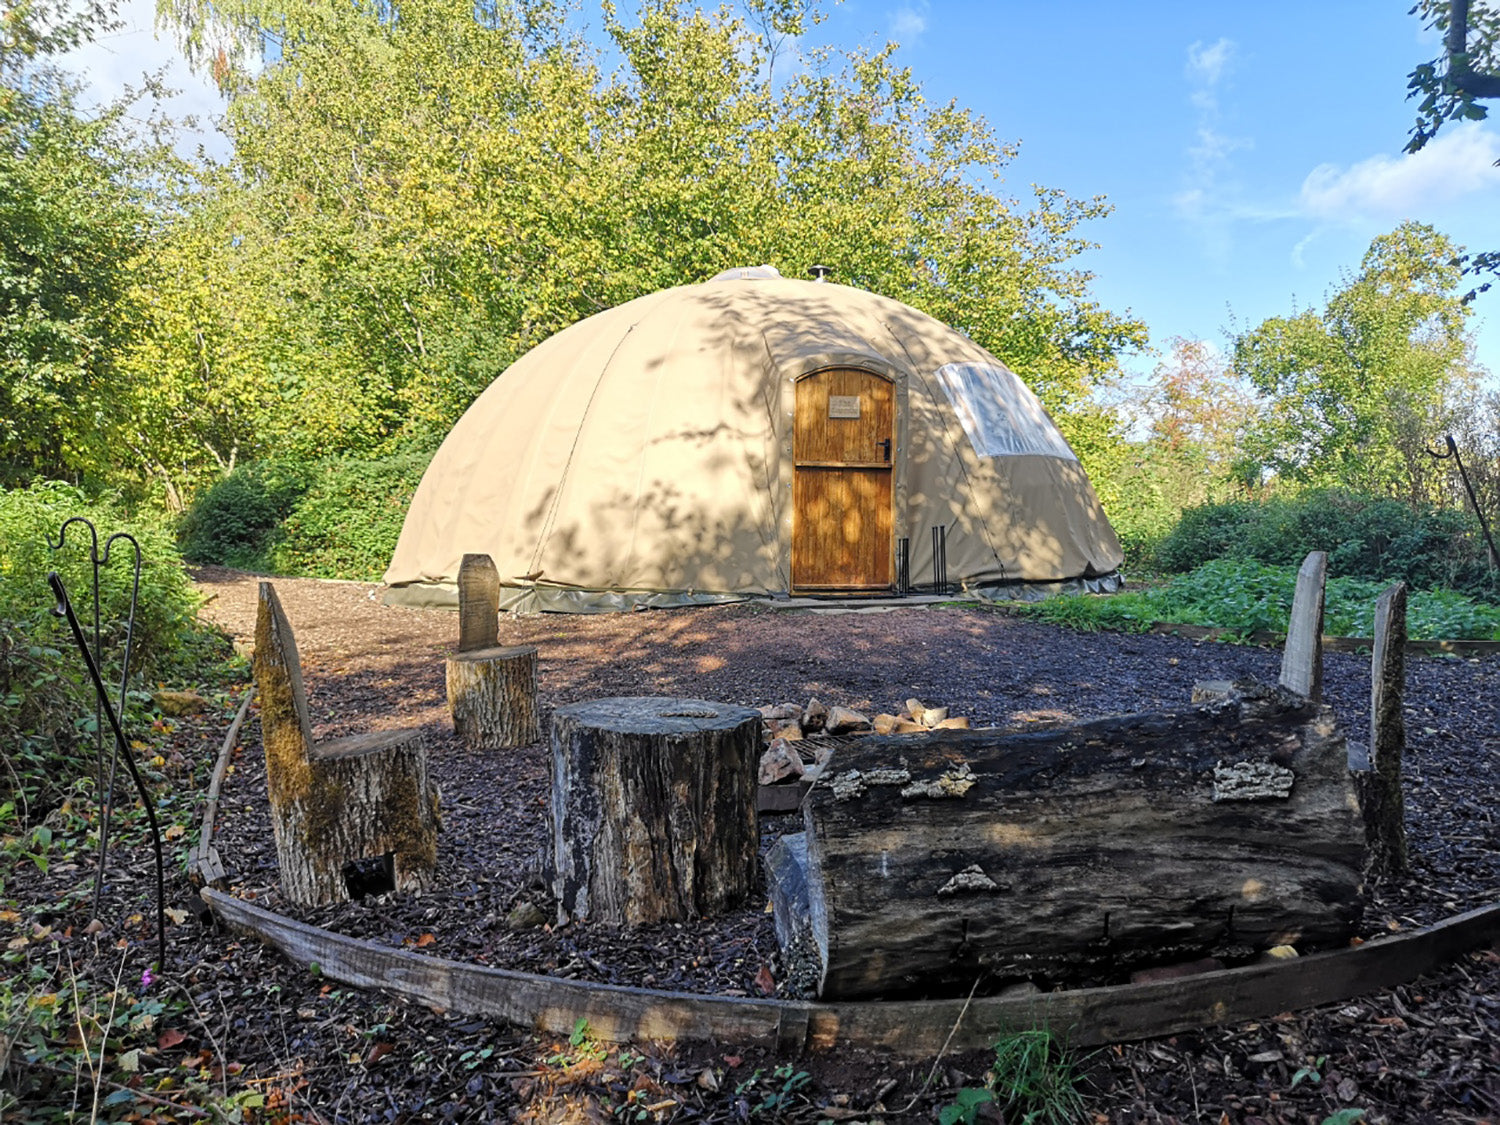 Alachigh luxury glamping tent at Penhein